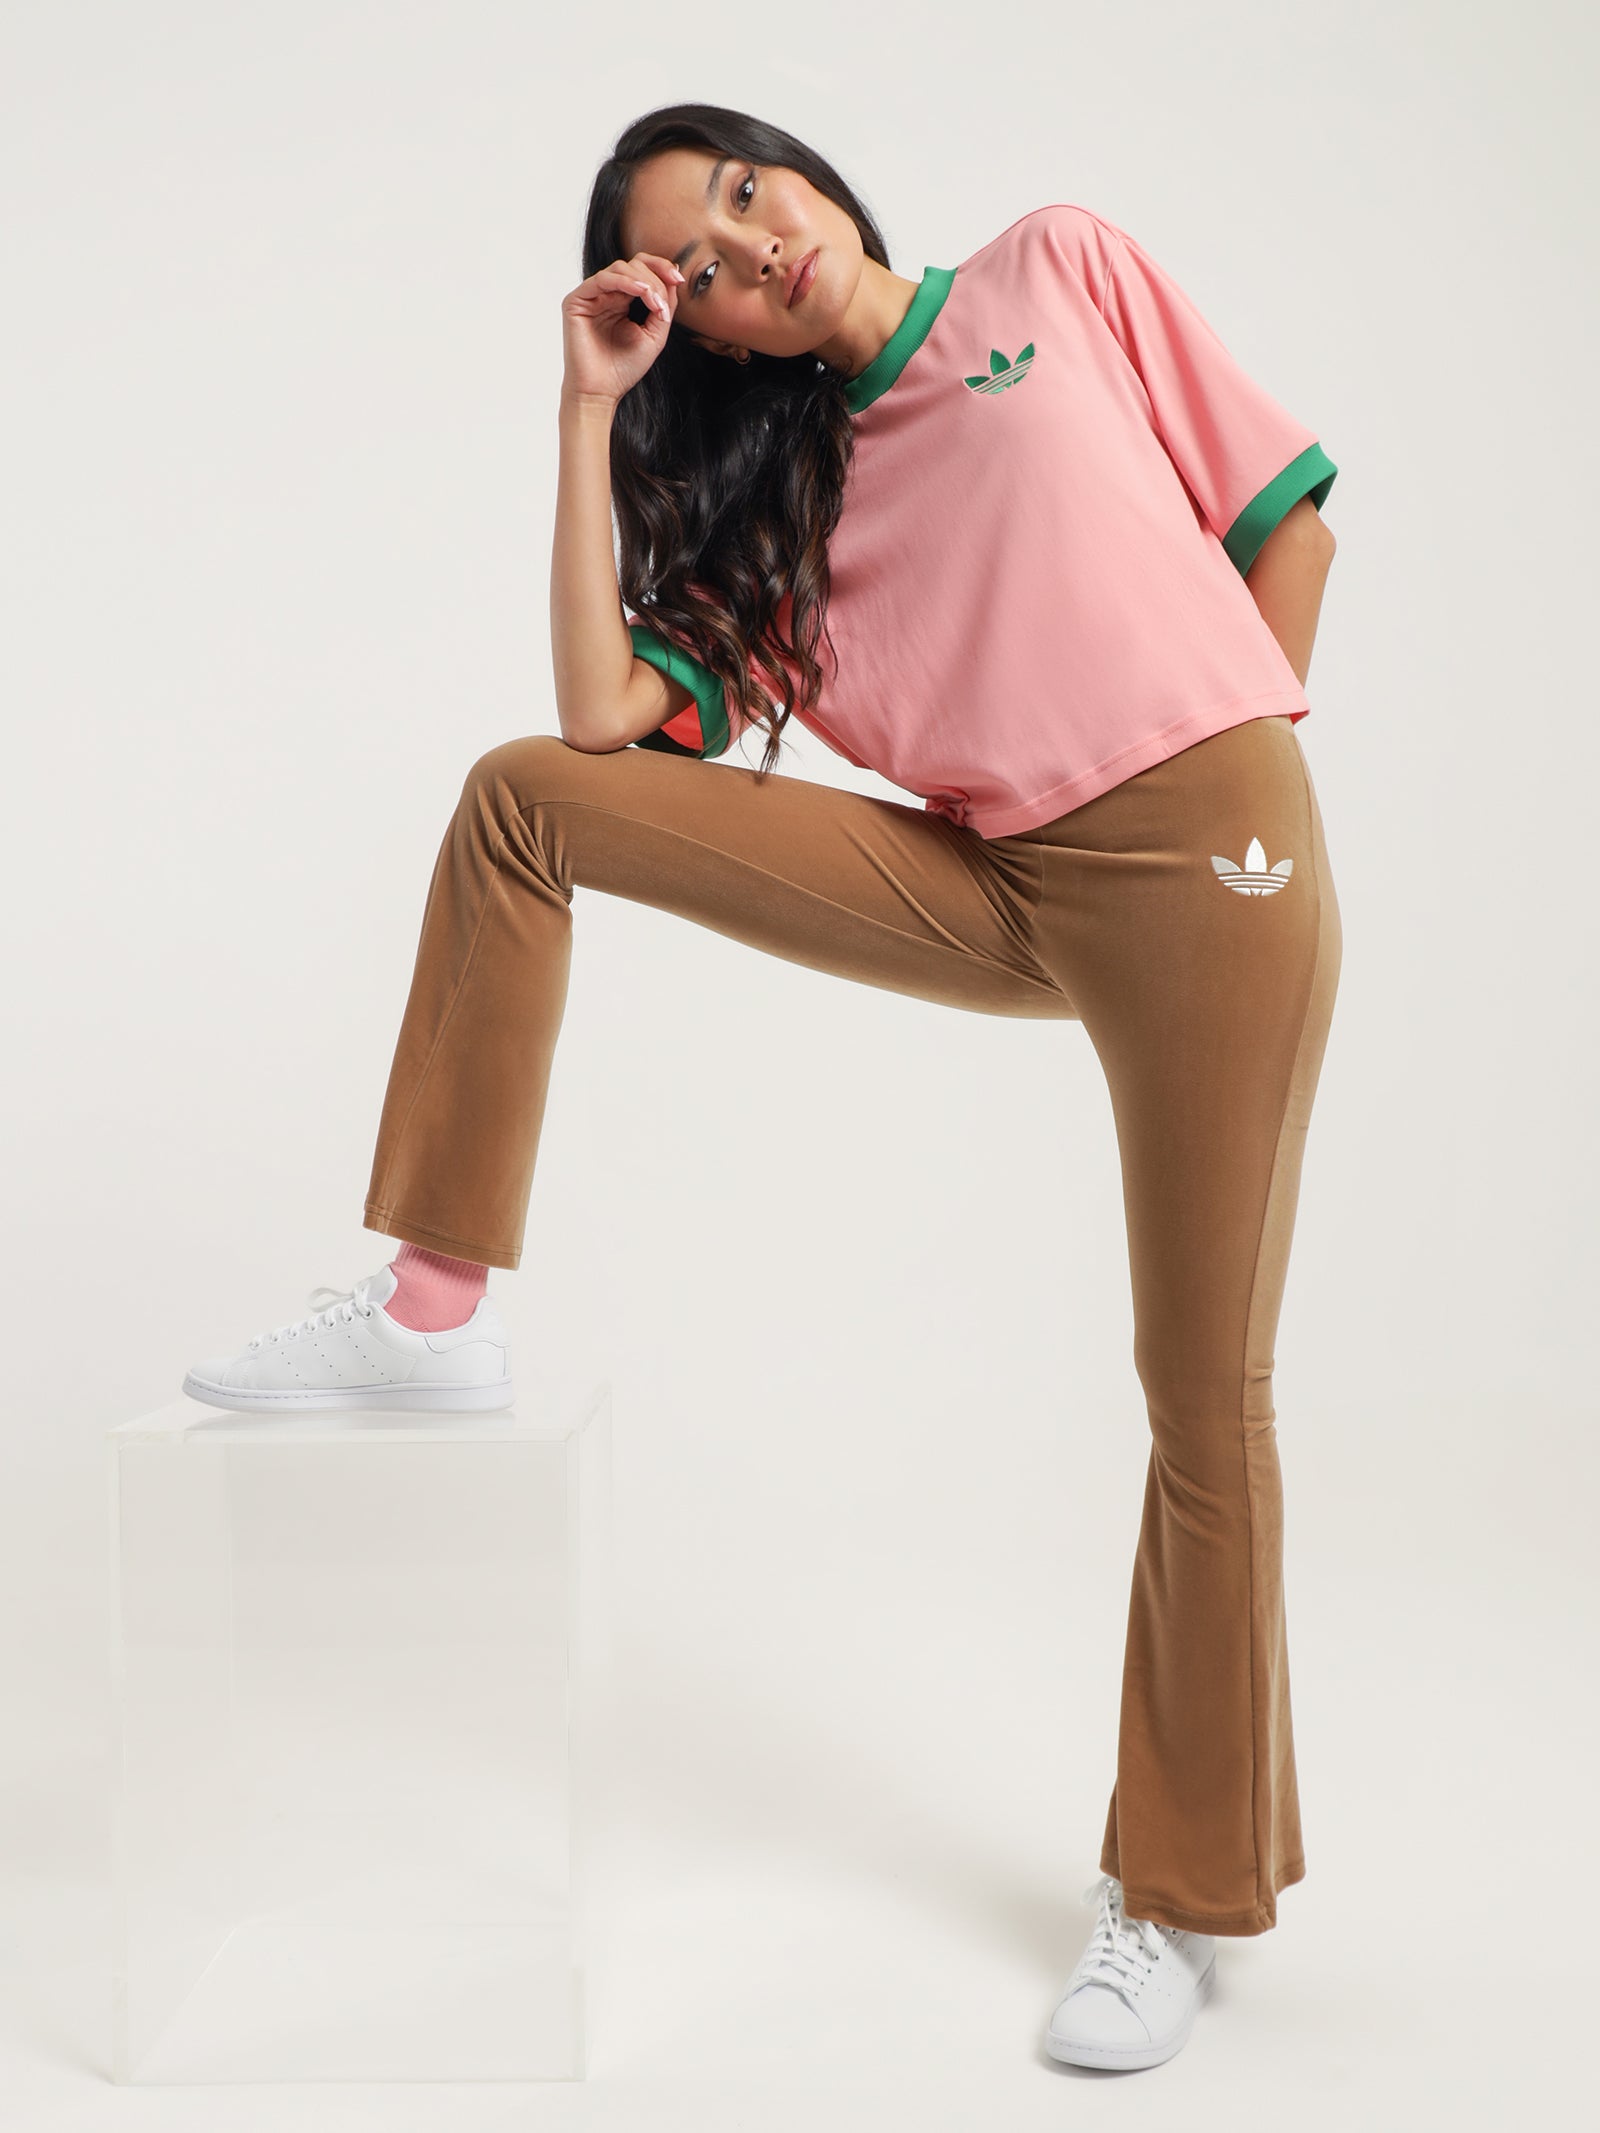 Adidas Originals 'Adicolor 70s' Flared Trousers In Brown for Women